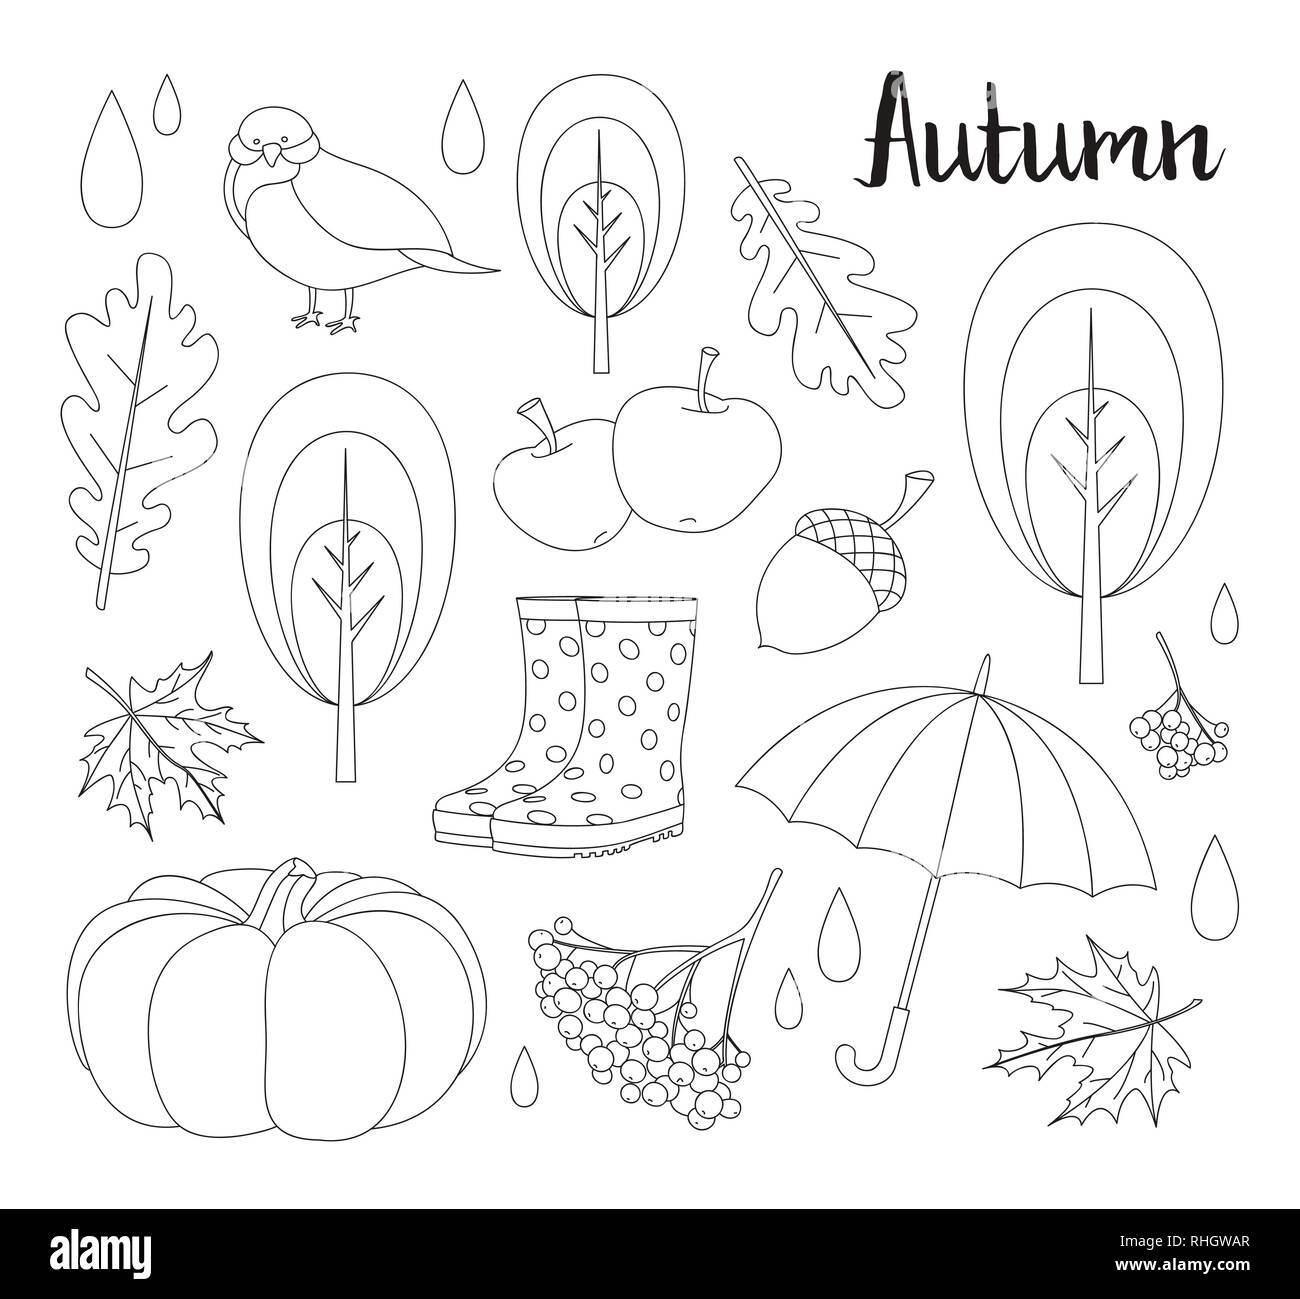 Autumn icon and objects set of leaf, nut, pumpkin, wheat, cloves, hazelnut, walnut, acorn. Vector engraved objects Detailed botanical illustrations Stock Vector